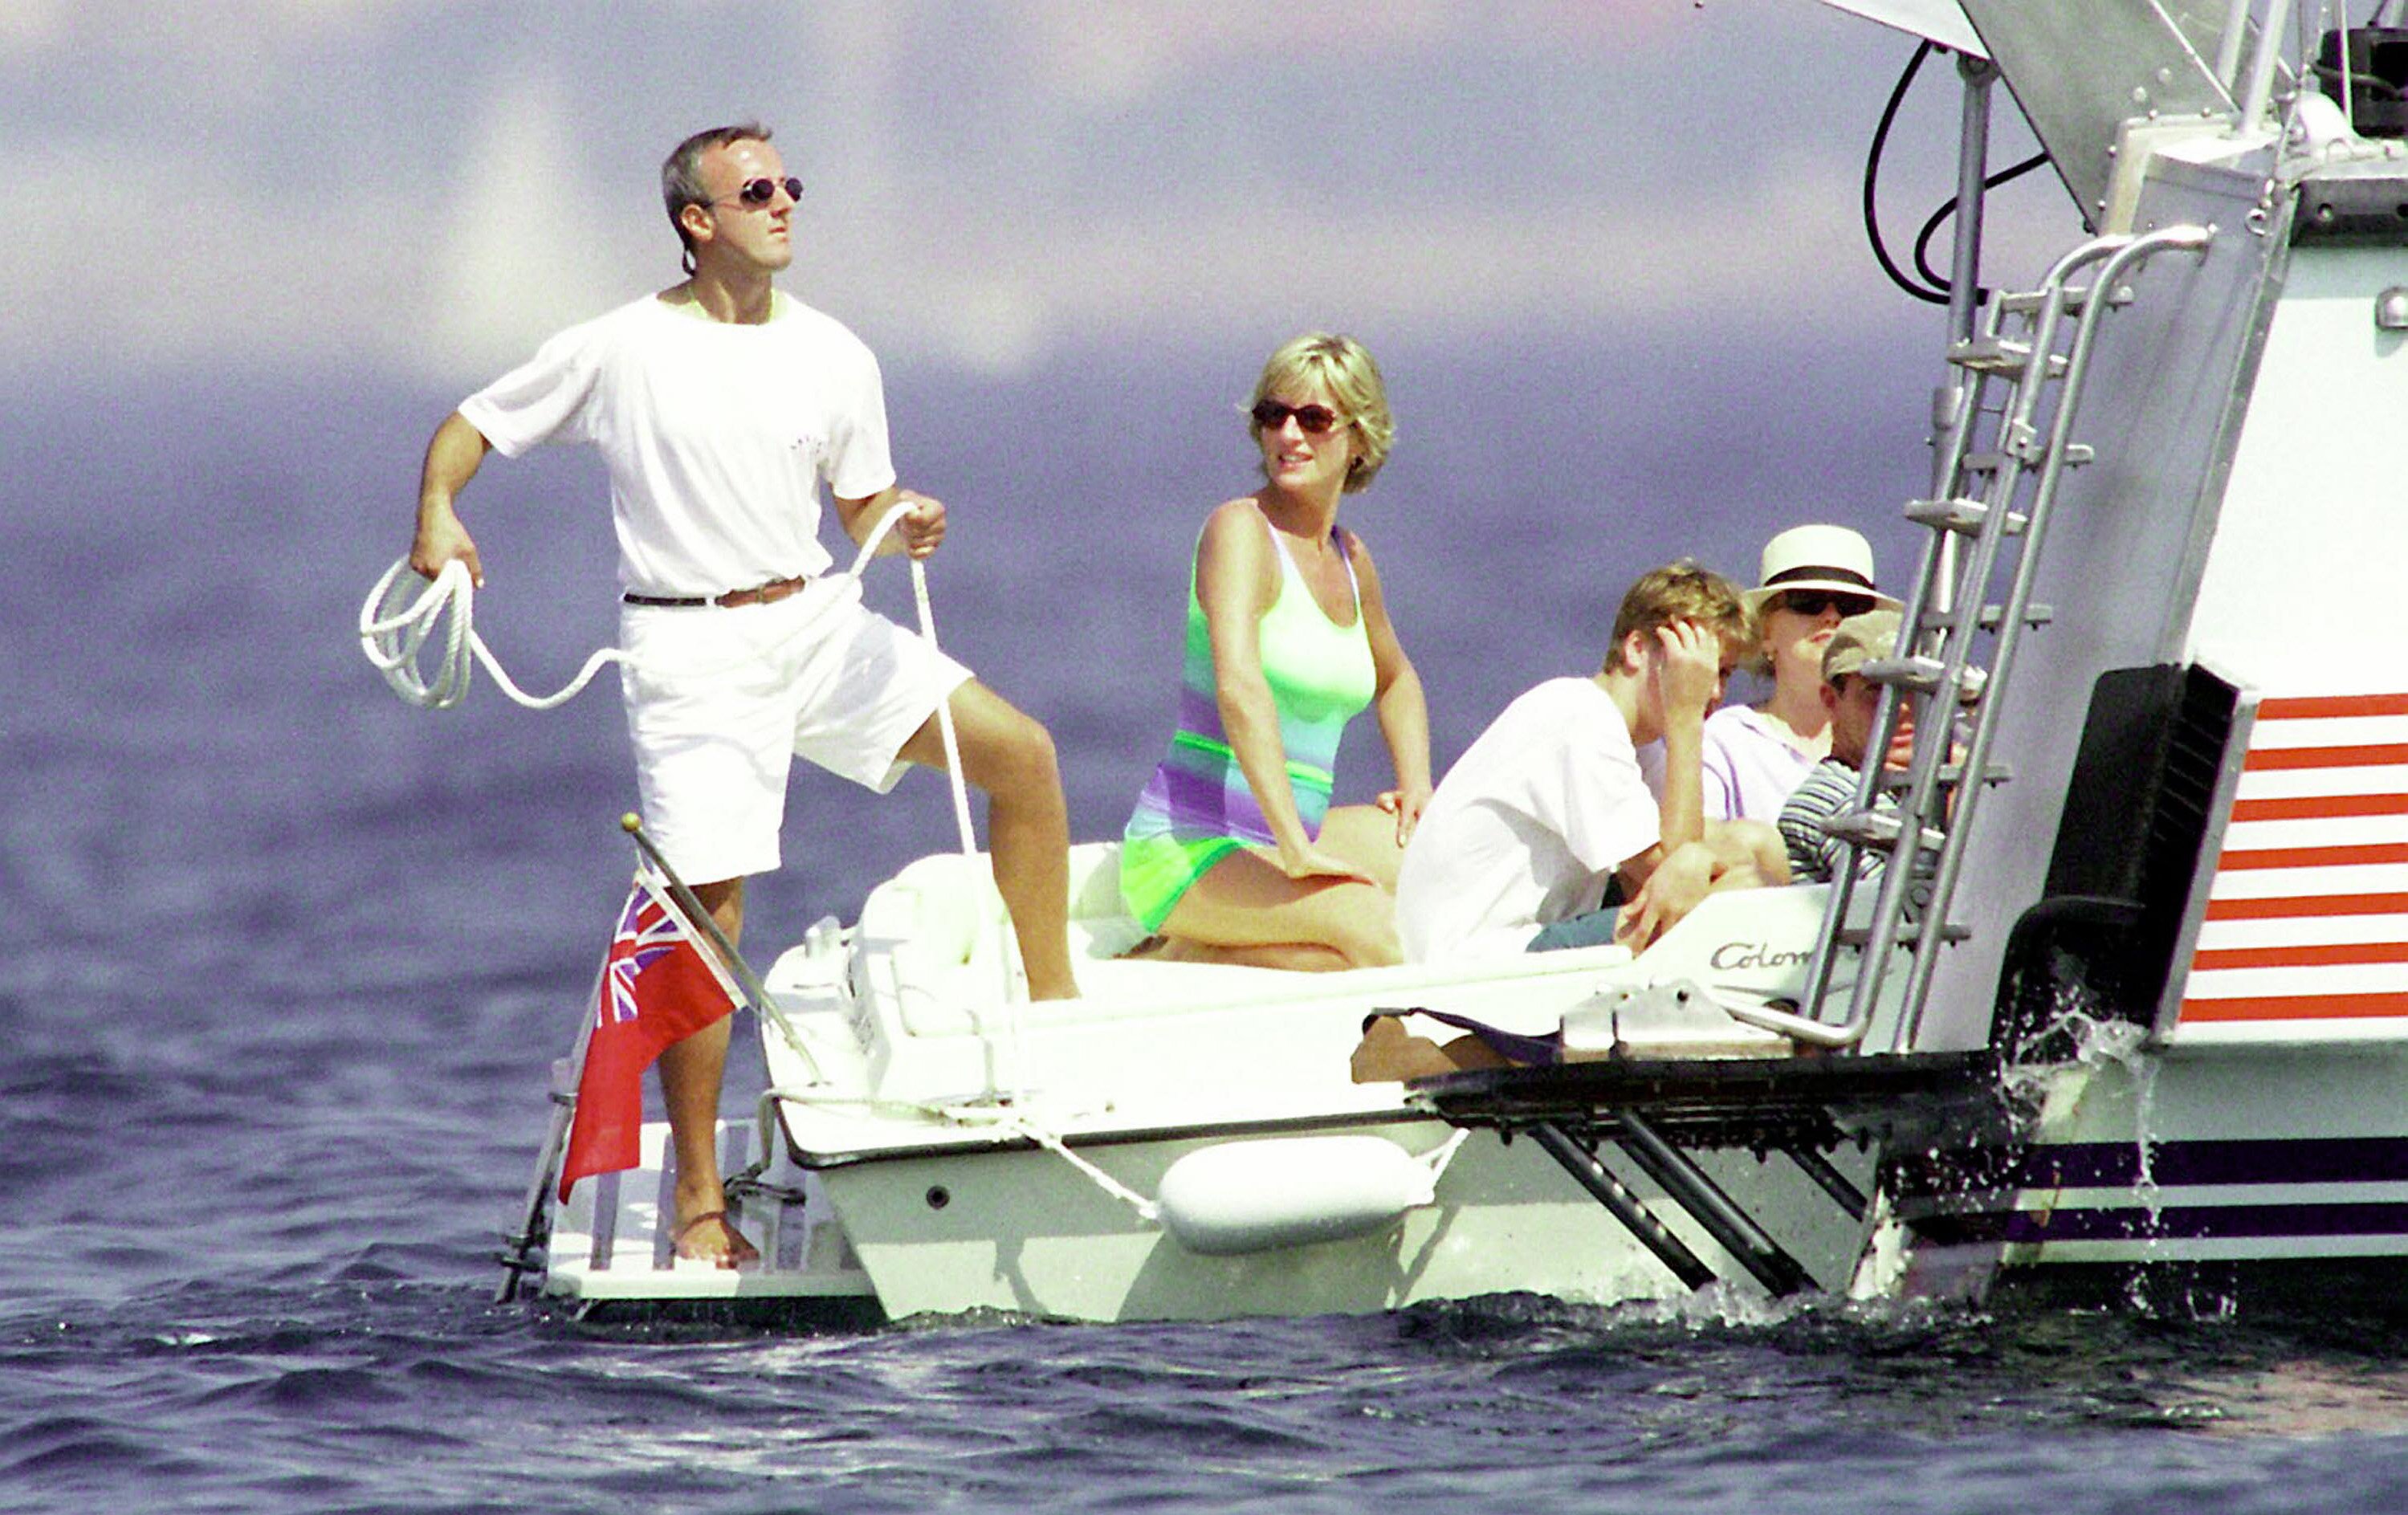 Diana, Princess of Wales and son Prince William are seen holidaying with Dodi Al Fayed (not pictured) in St Tropez, France. July 17 1997 | Source: Getty Images